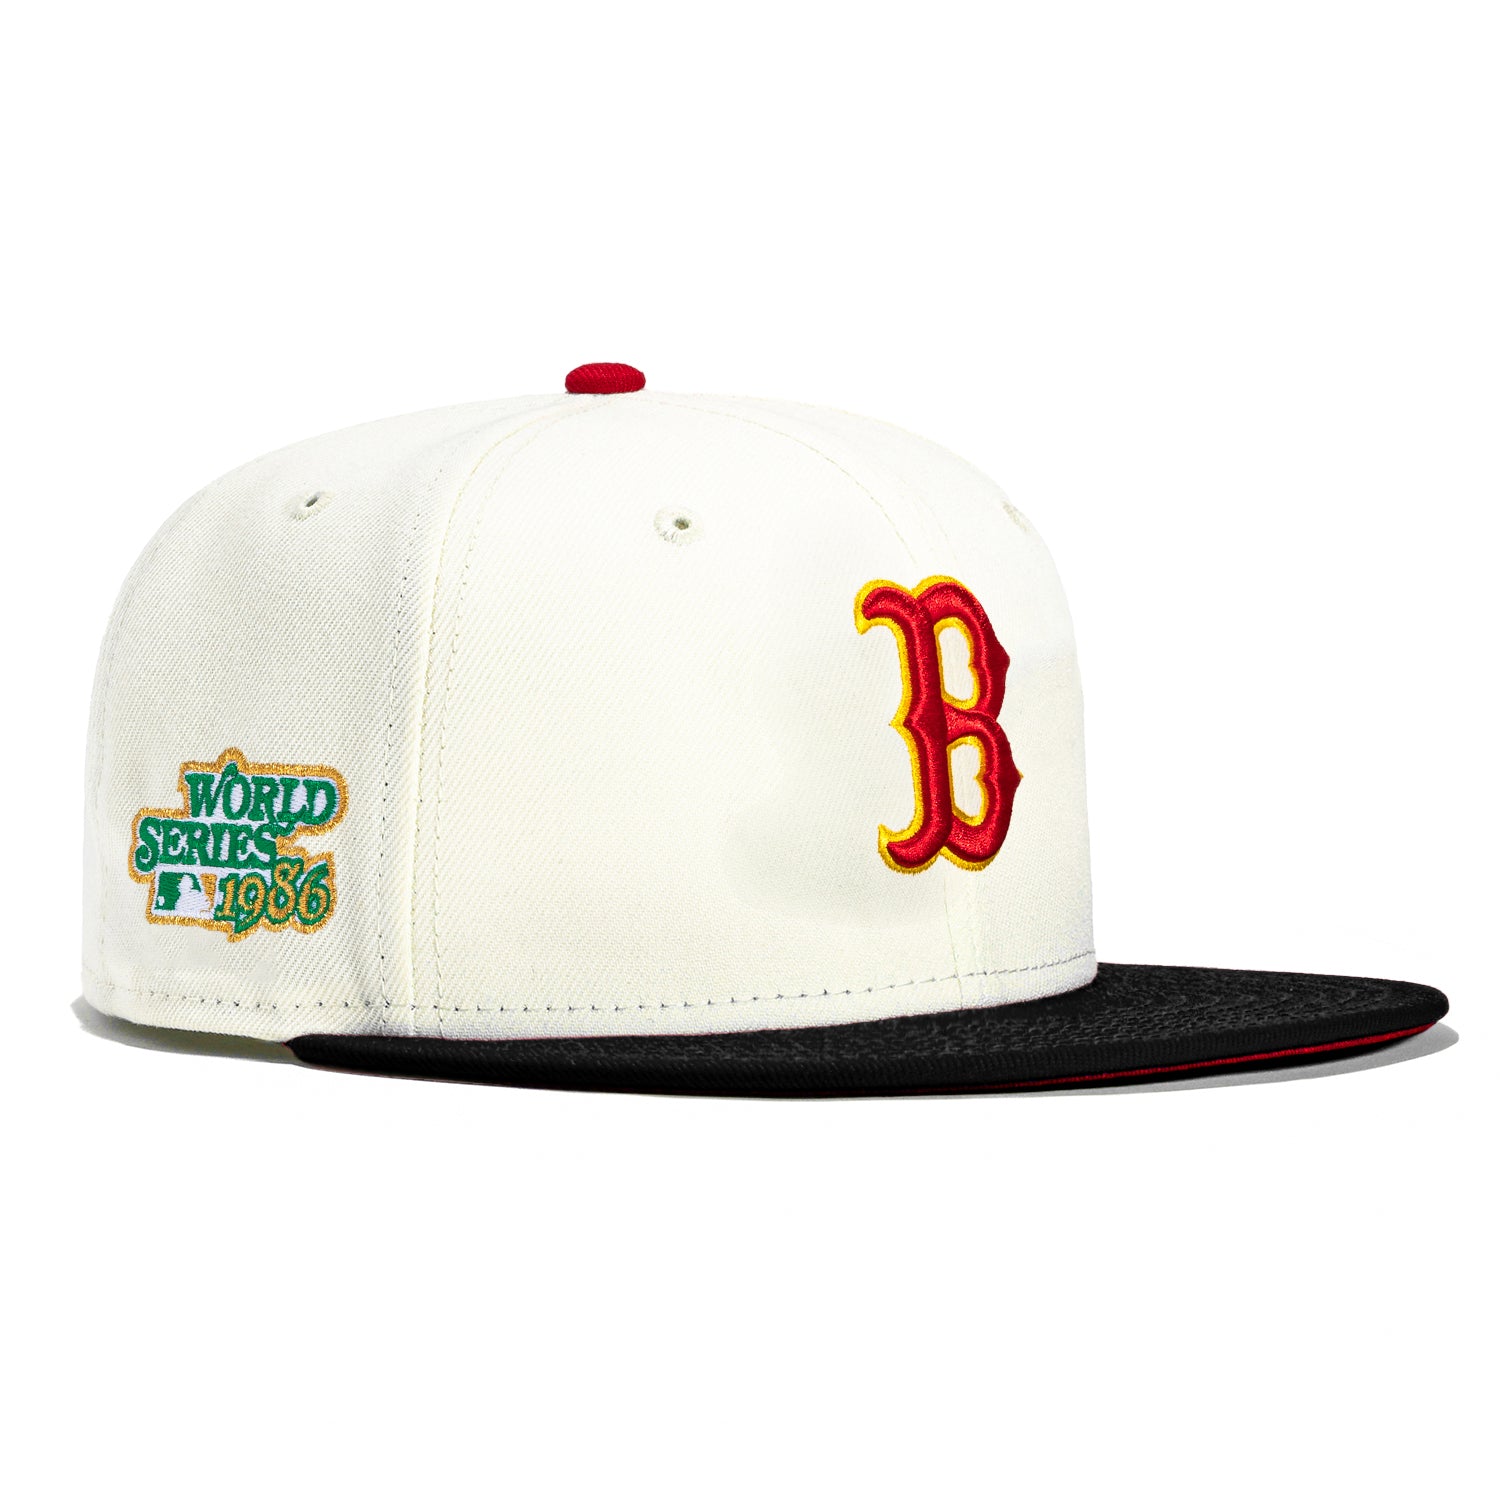 New Era 59Fifty Boston Red Sox 1986 World Series Patch Hat - White, Bl ...